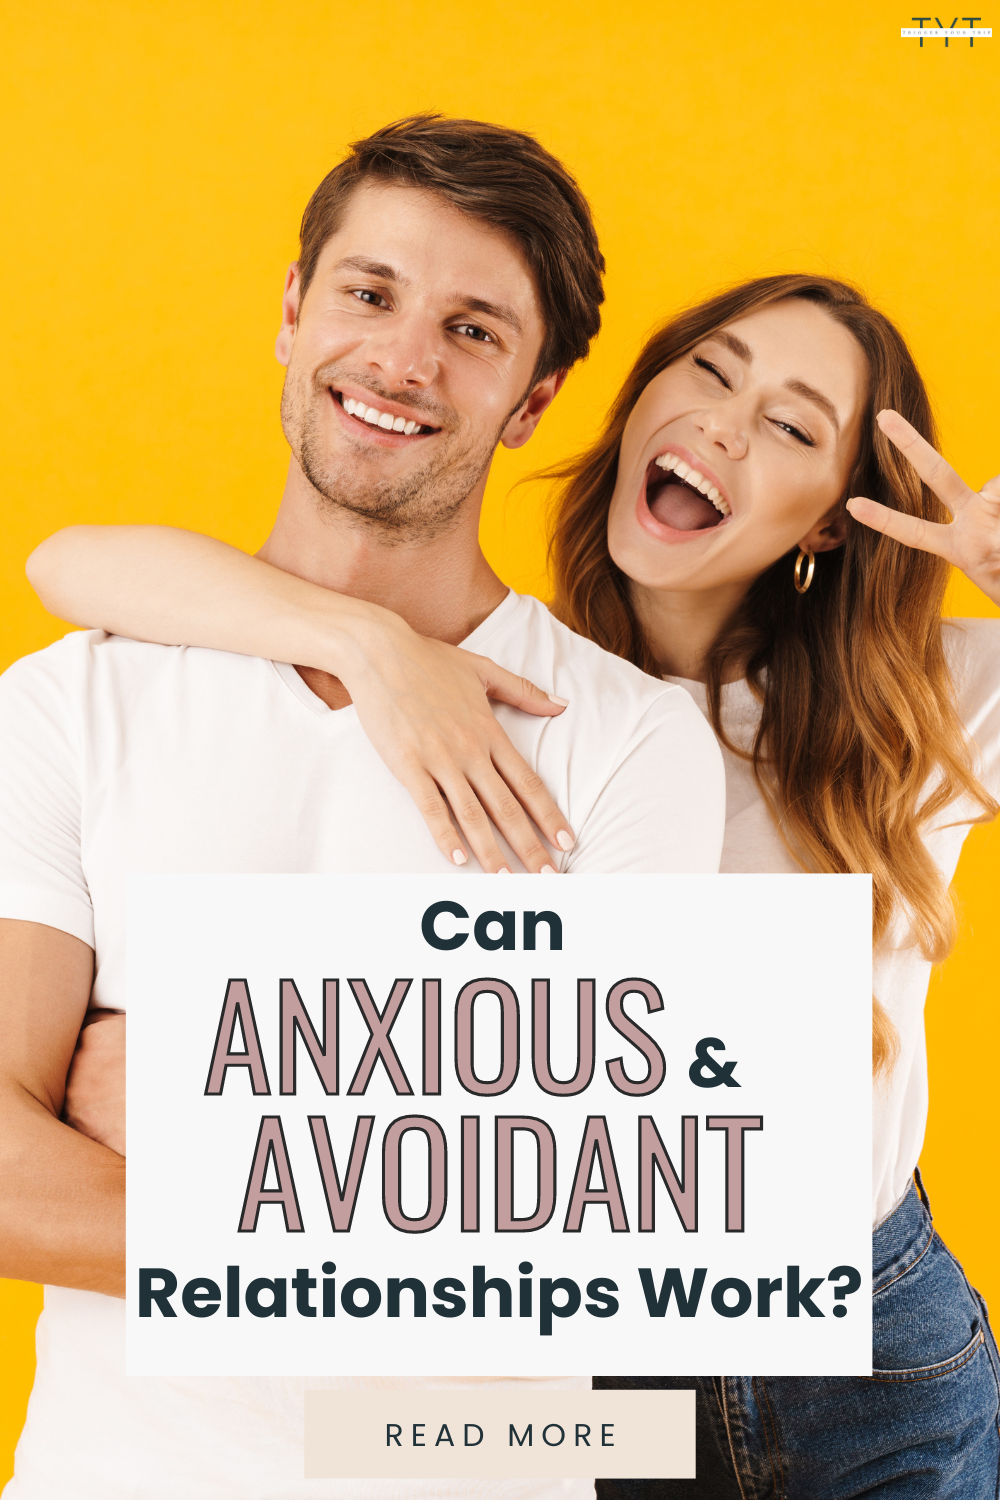 anxious avoidants regret breaking up when in love: that's how an anxious avoidant relationship work